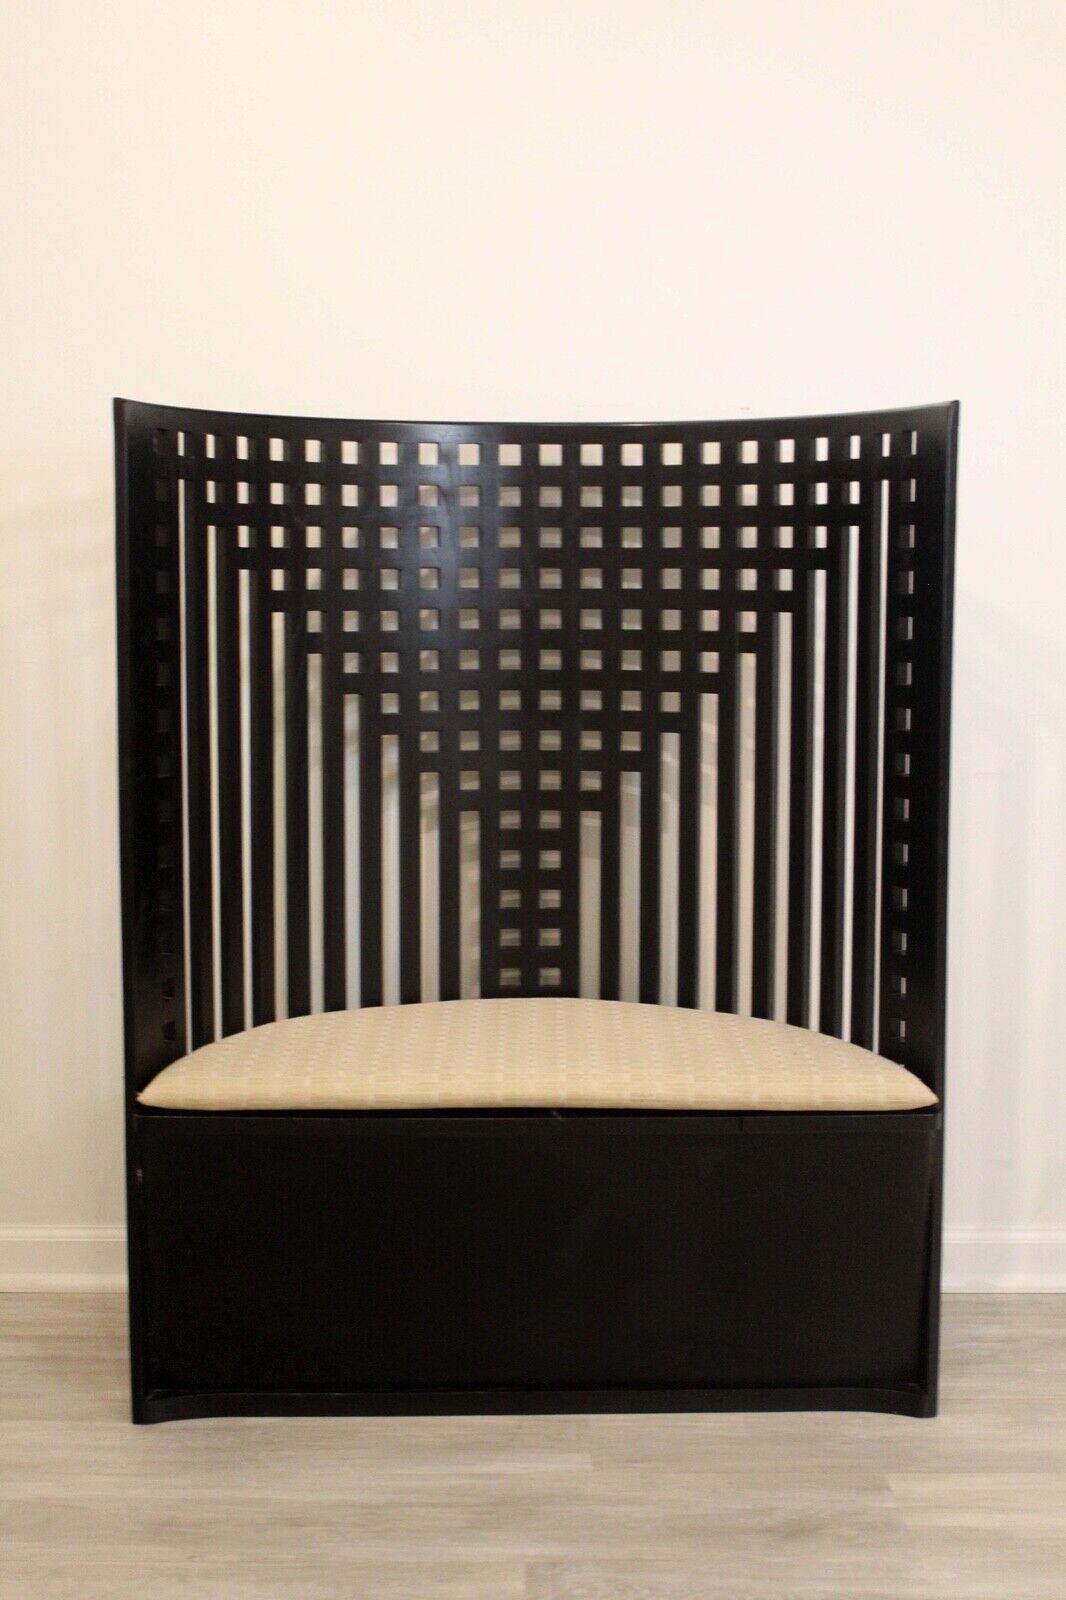 This throne-armchair designed by Charles Rennie Mackintosh in 1904. Relaunched in 1973. Manufactured by Cassina in Italy. This throne-like armchair is a new iteration of the model that CRM donated, in 1904, to the “Willow Tea Rooms” in Glasgow, his